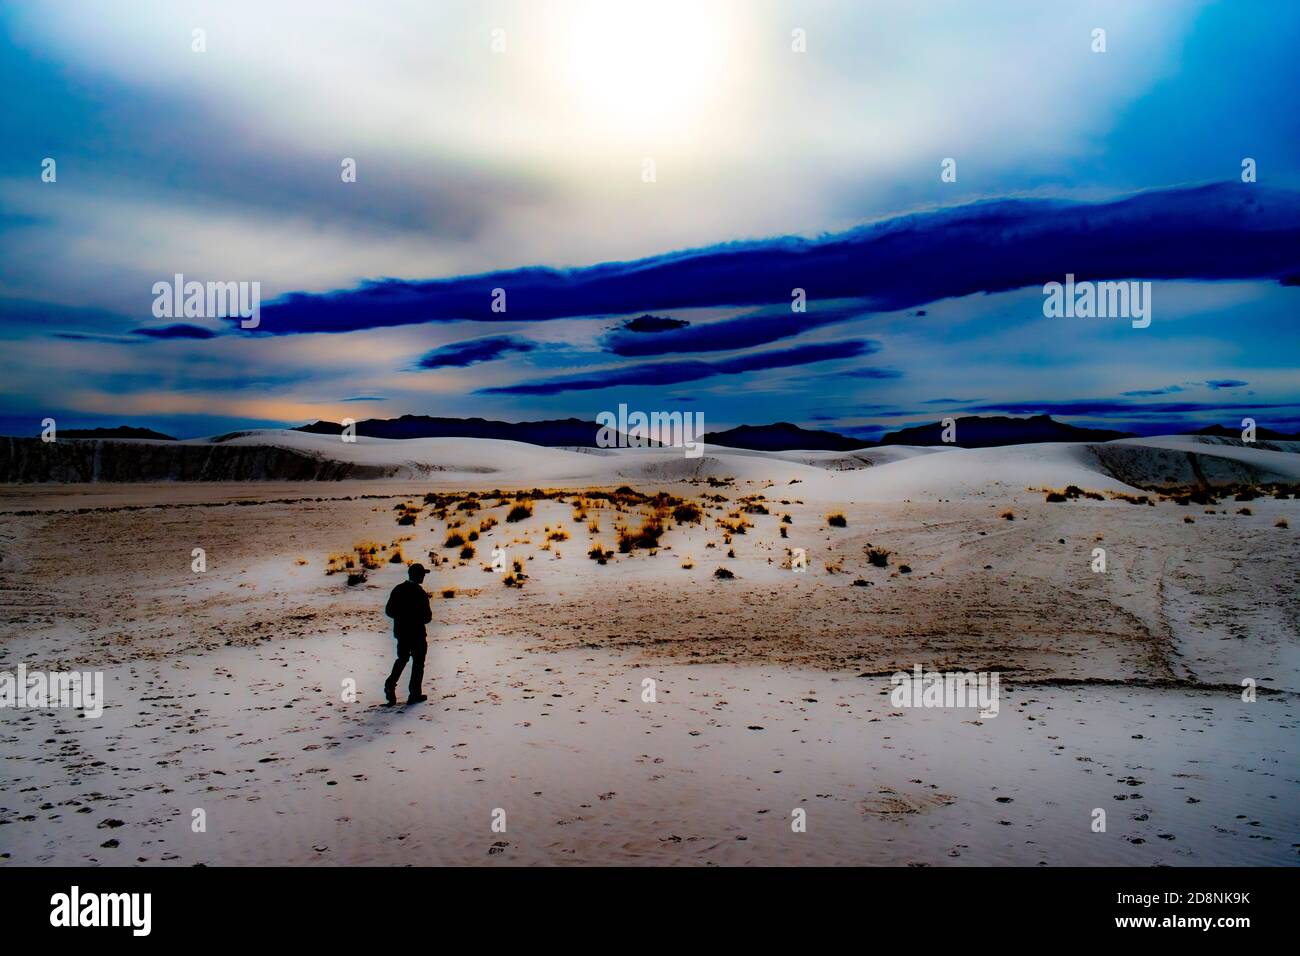 Silhouette of a person standing among the Sand Dunes of White Sands National Park with surreal colors. Stock Photo